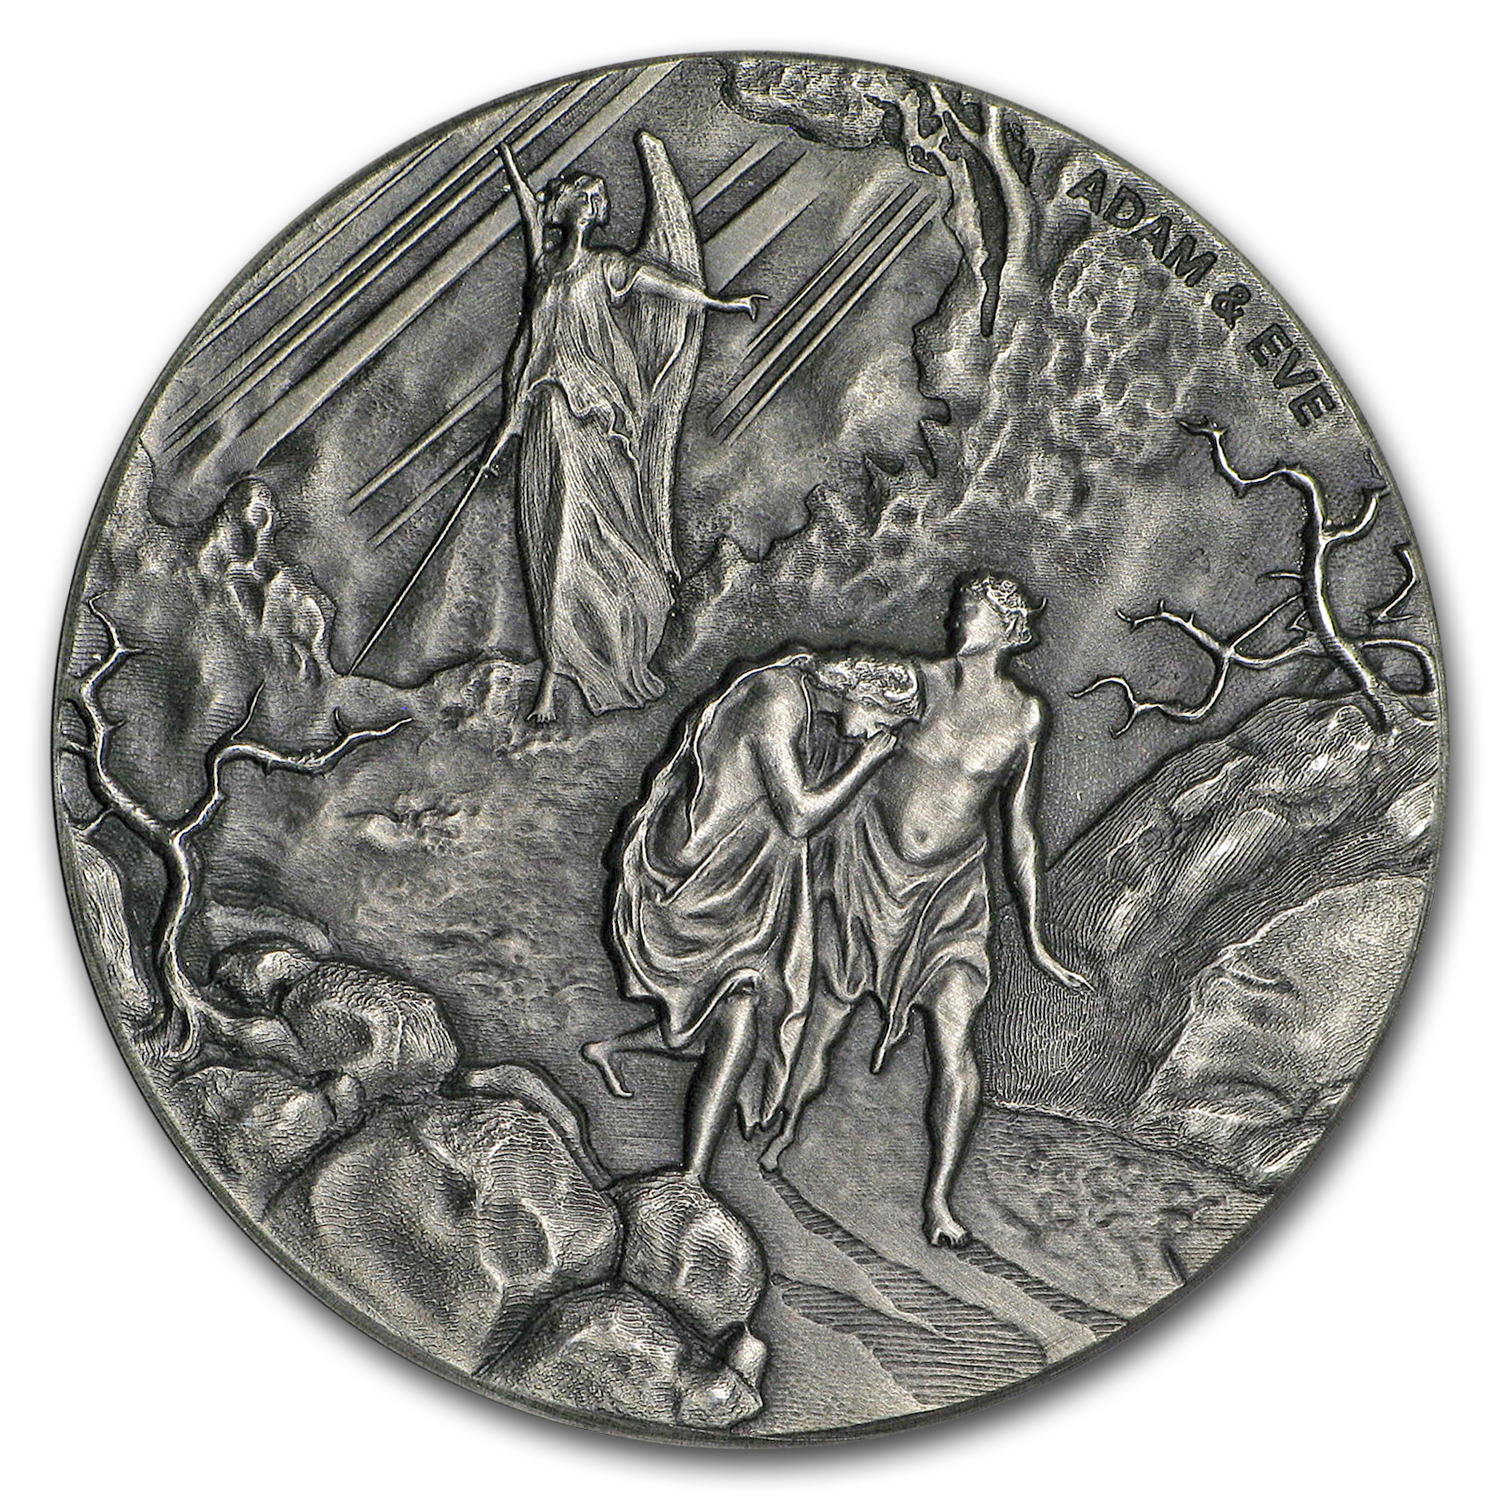 Buy 2016 2 oz Silver Coin - Biblical Series Adam and Eve (Coin Only)